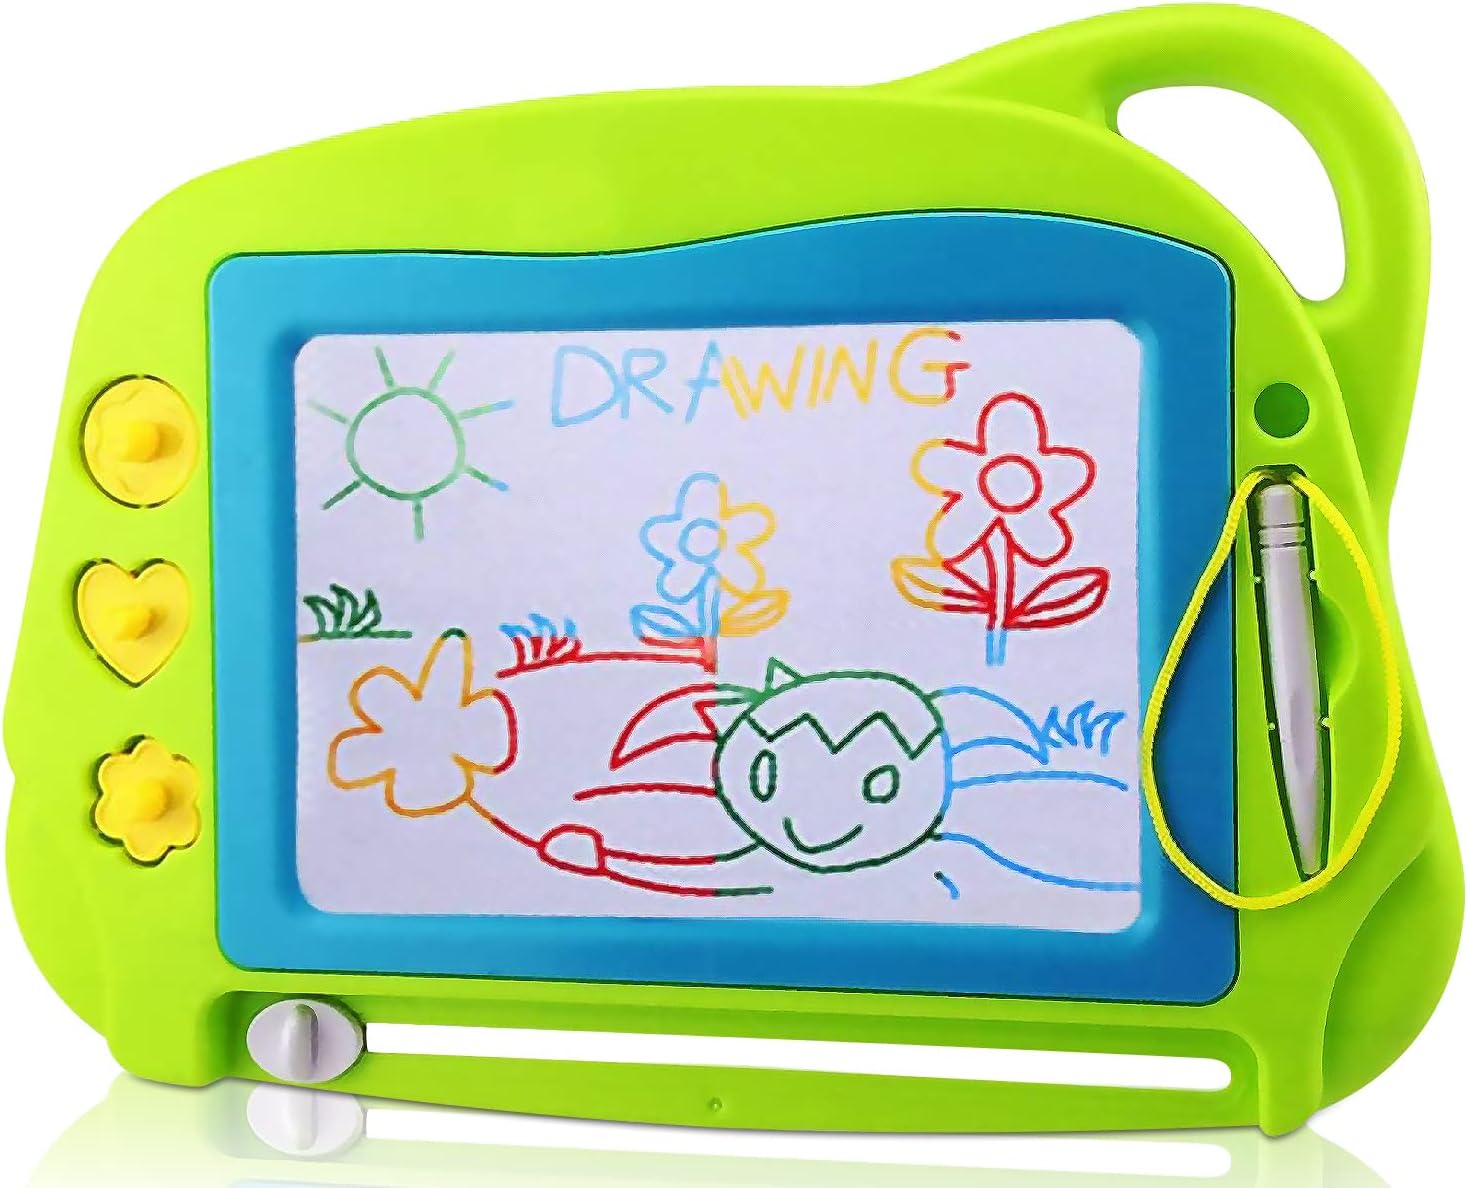 AiTuiTui Magnetic Drawing Board Mini Travel Doodle, Erasable Writing Sketch Colorful Pad Area Educational Learning Toy for Kid/Toddlers/Babies with 3 Stamps and 1 Pen (Green)